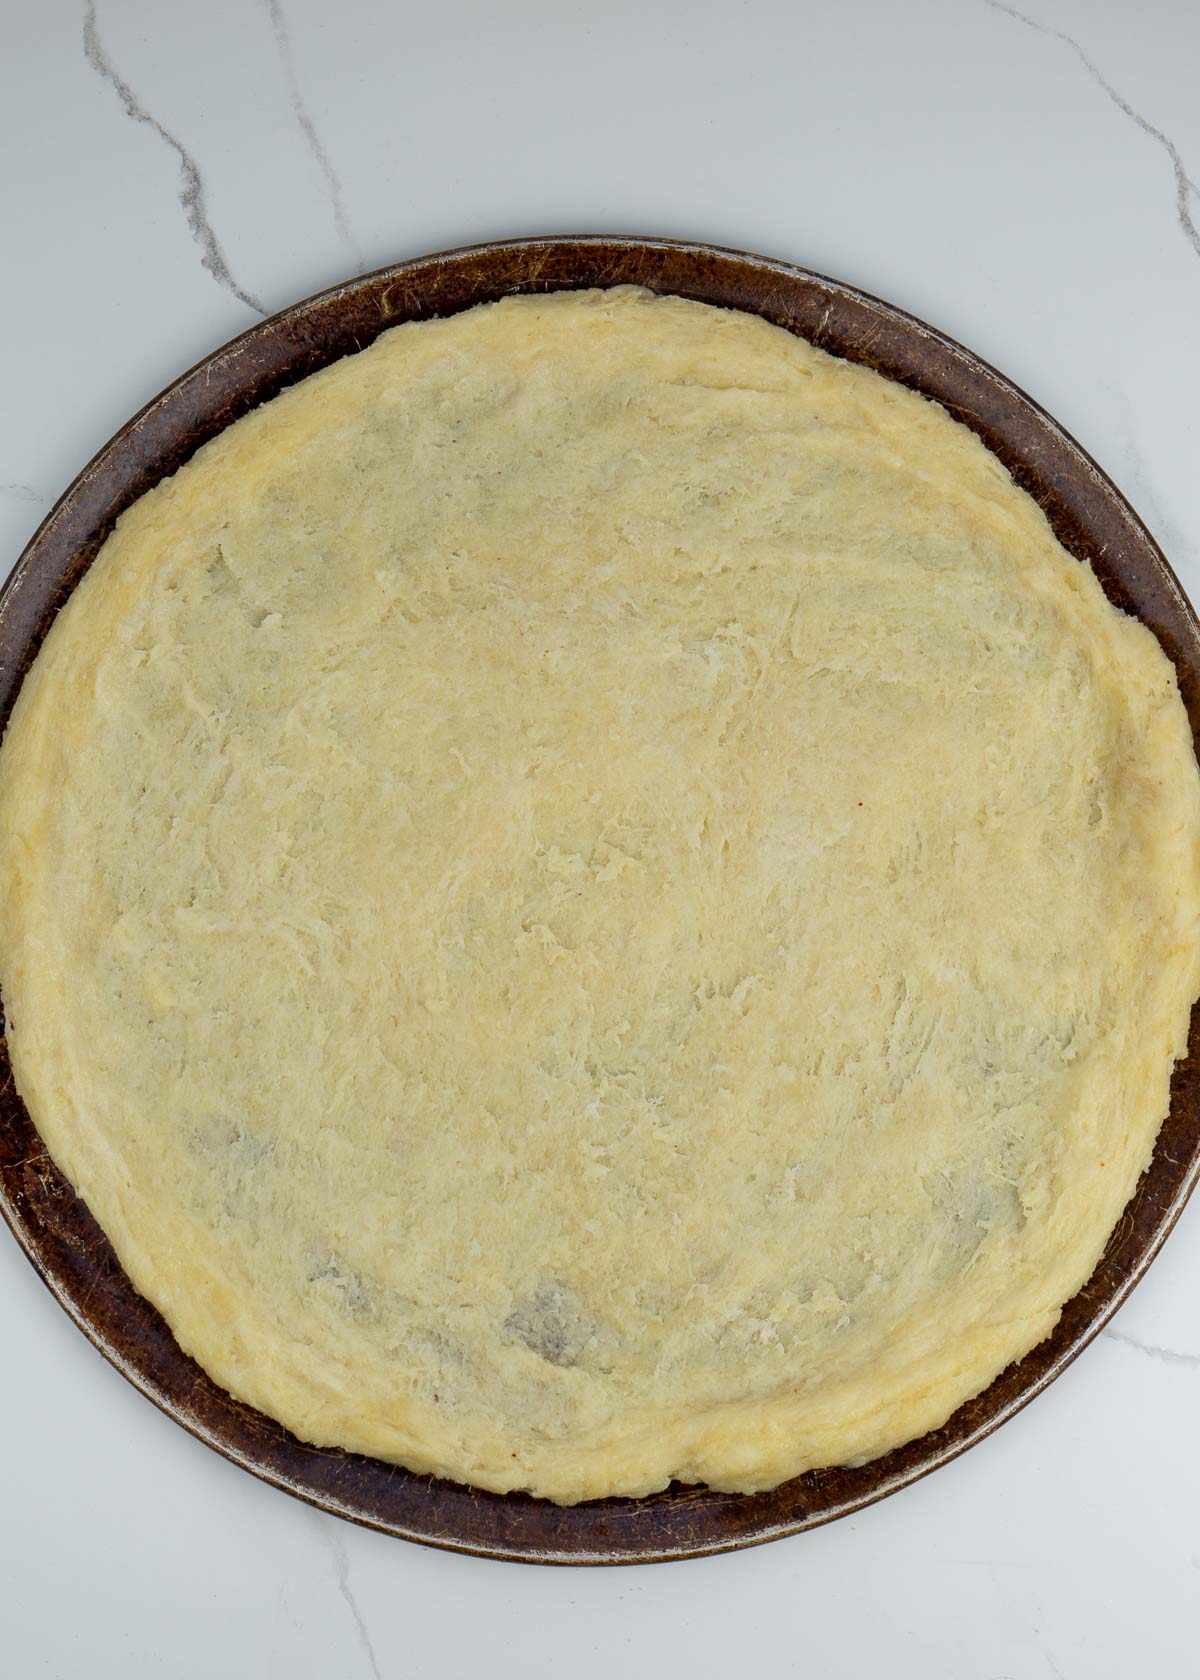 Follow this step by step guide to make the BEST Keto Pizza Crust Recipe! This crust is made from a fat head dough base and is low carb, grain and gluten free!